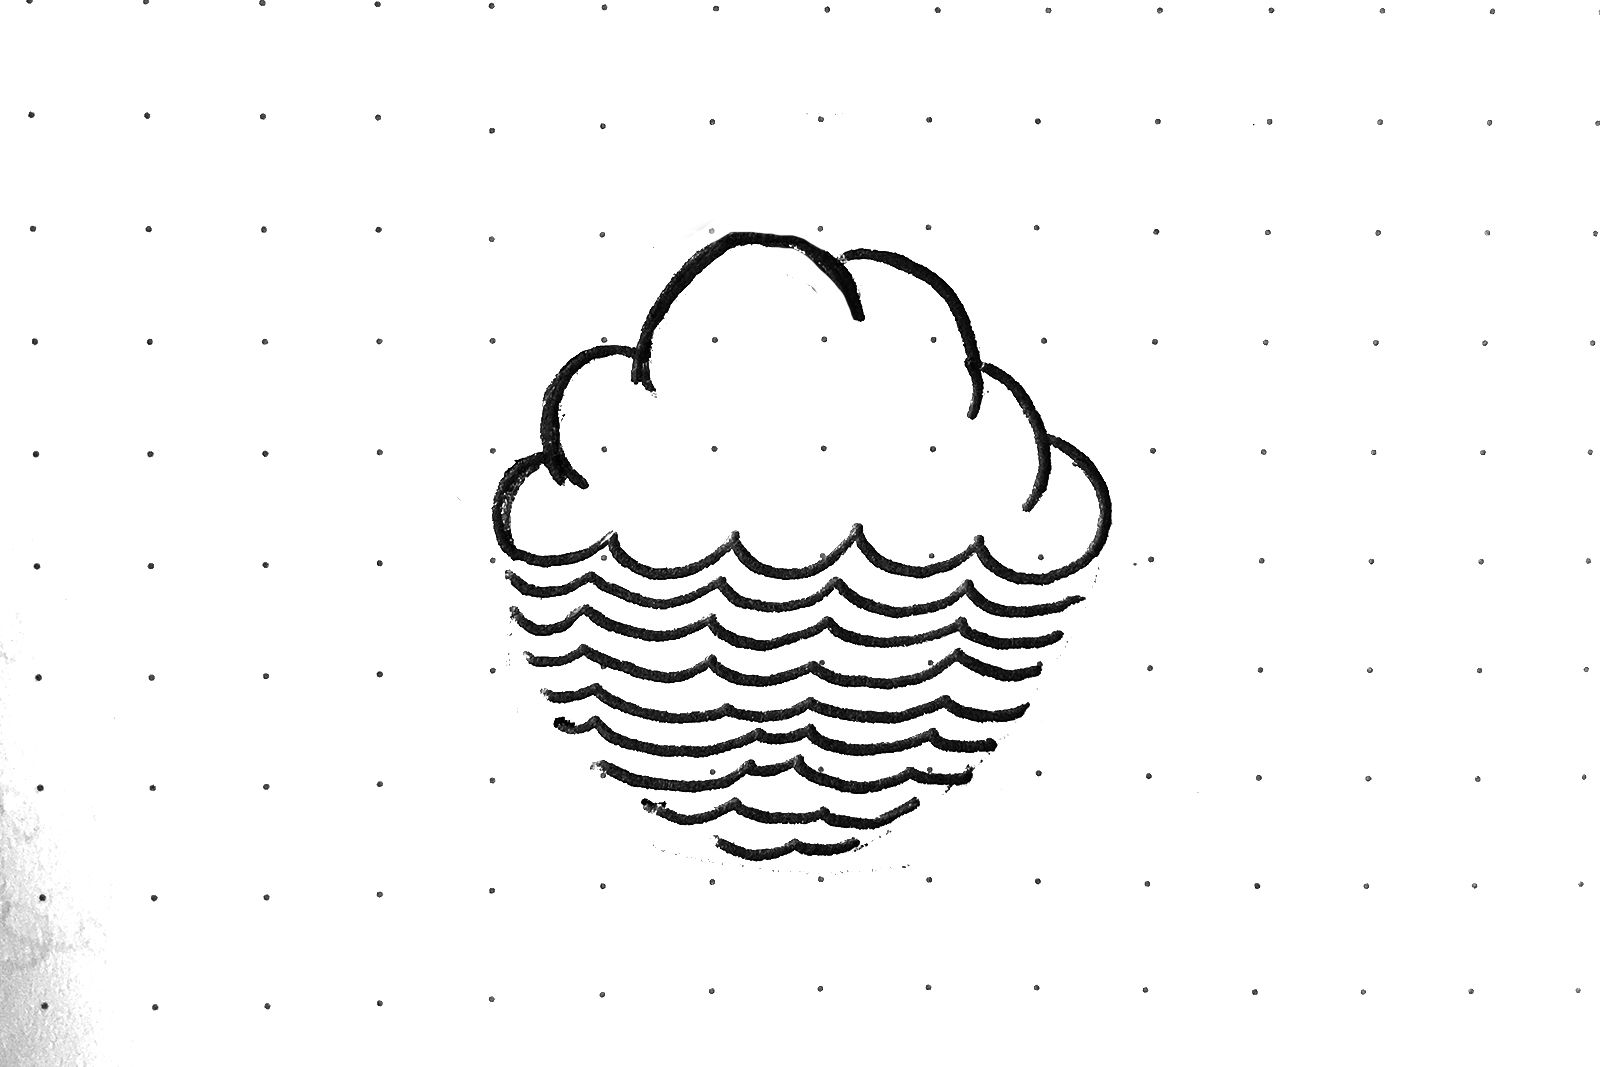 brewers journal – cloudwater